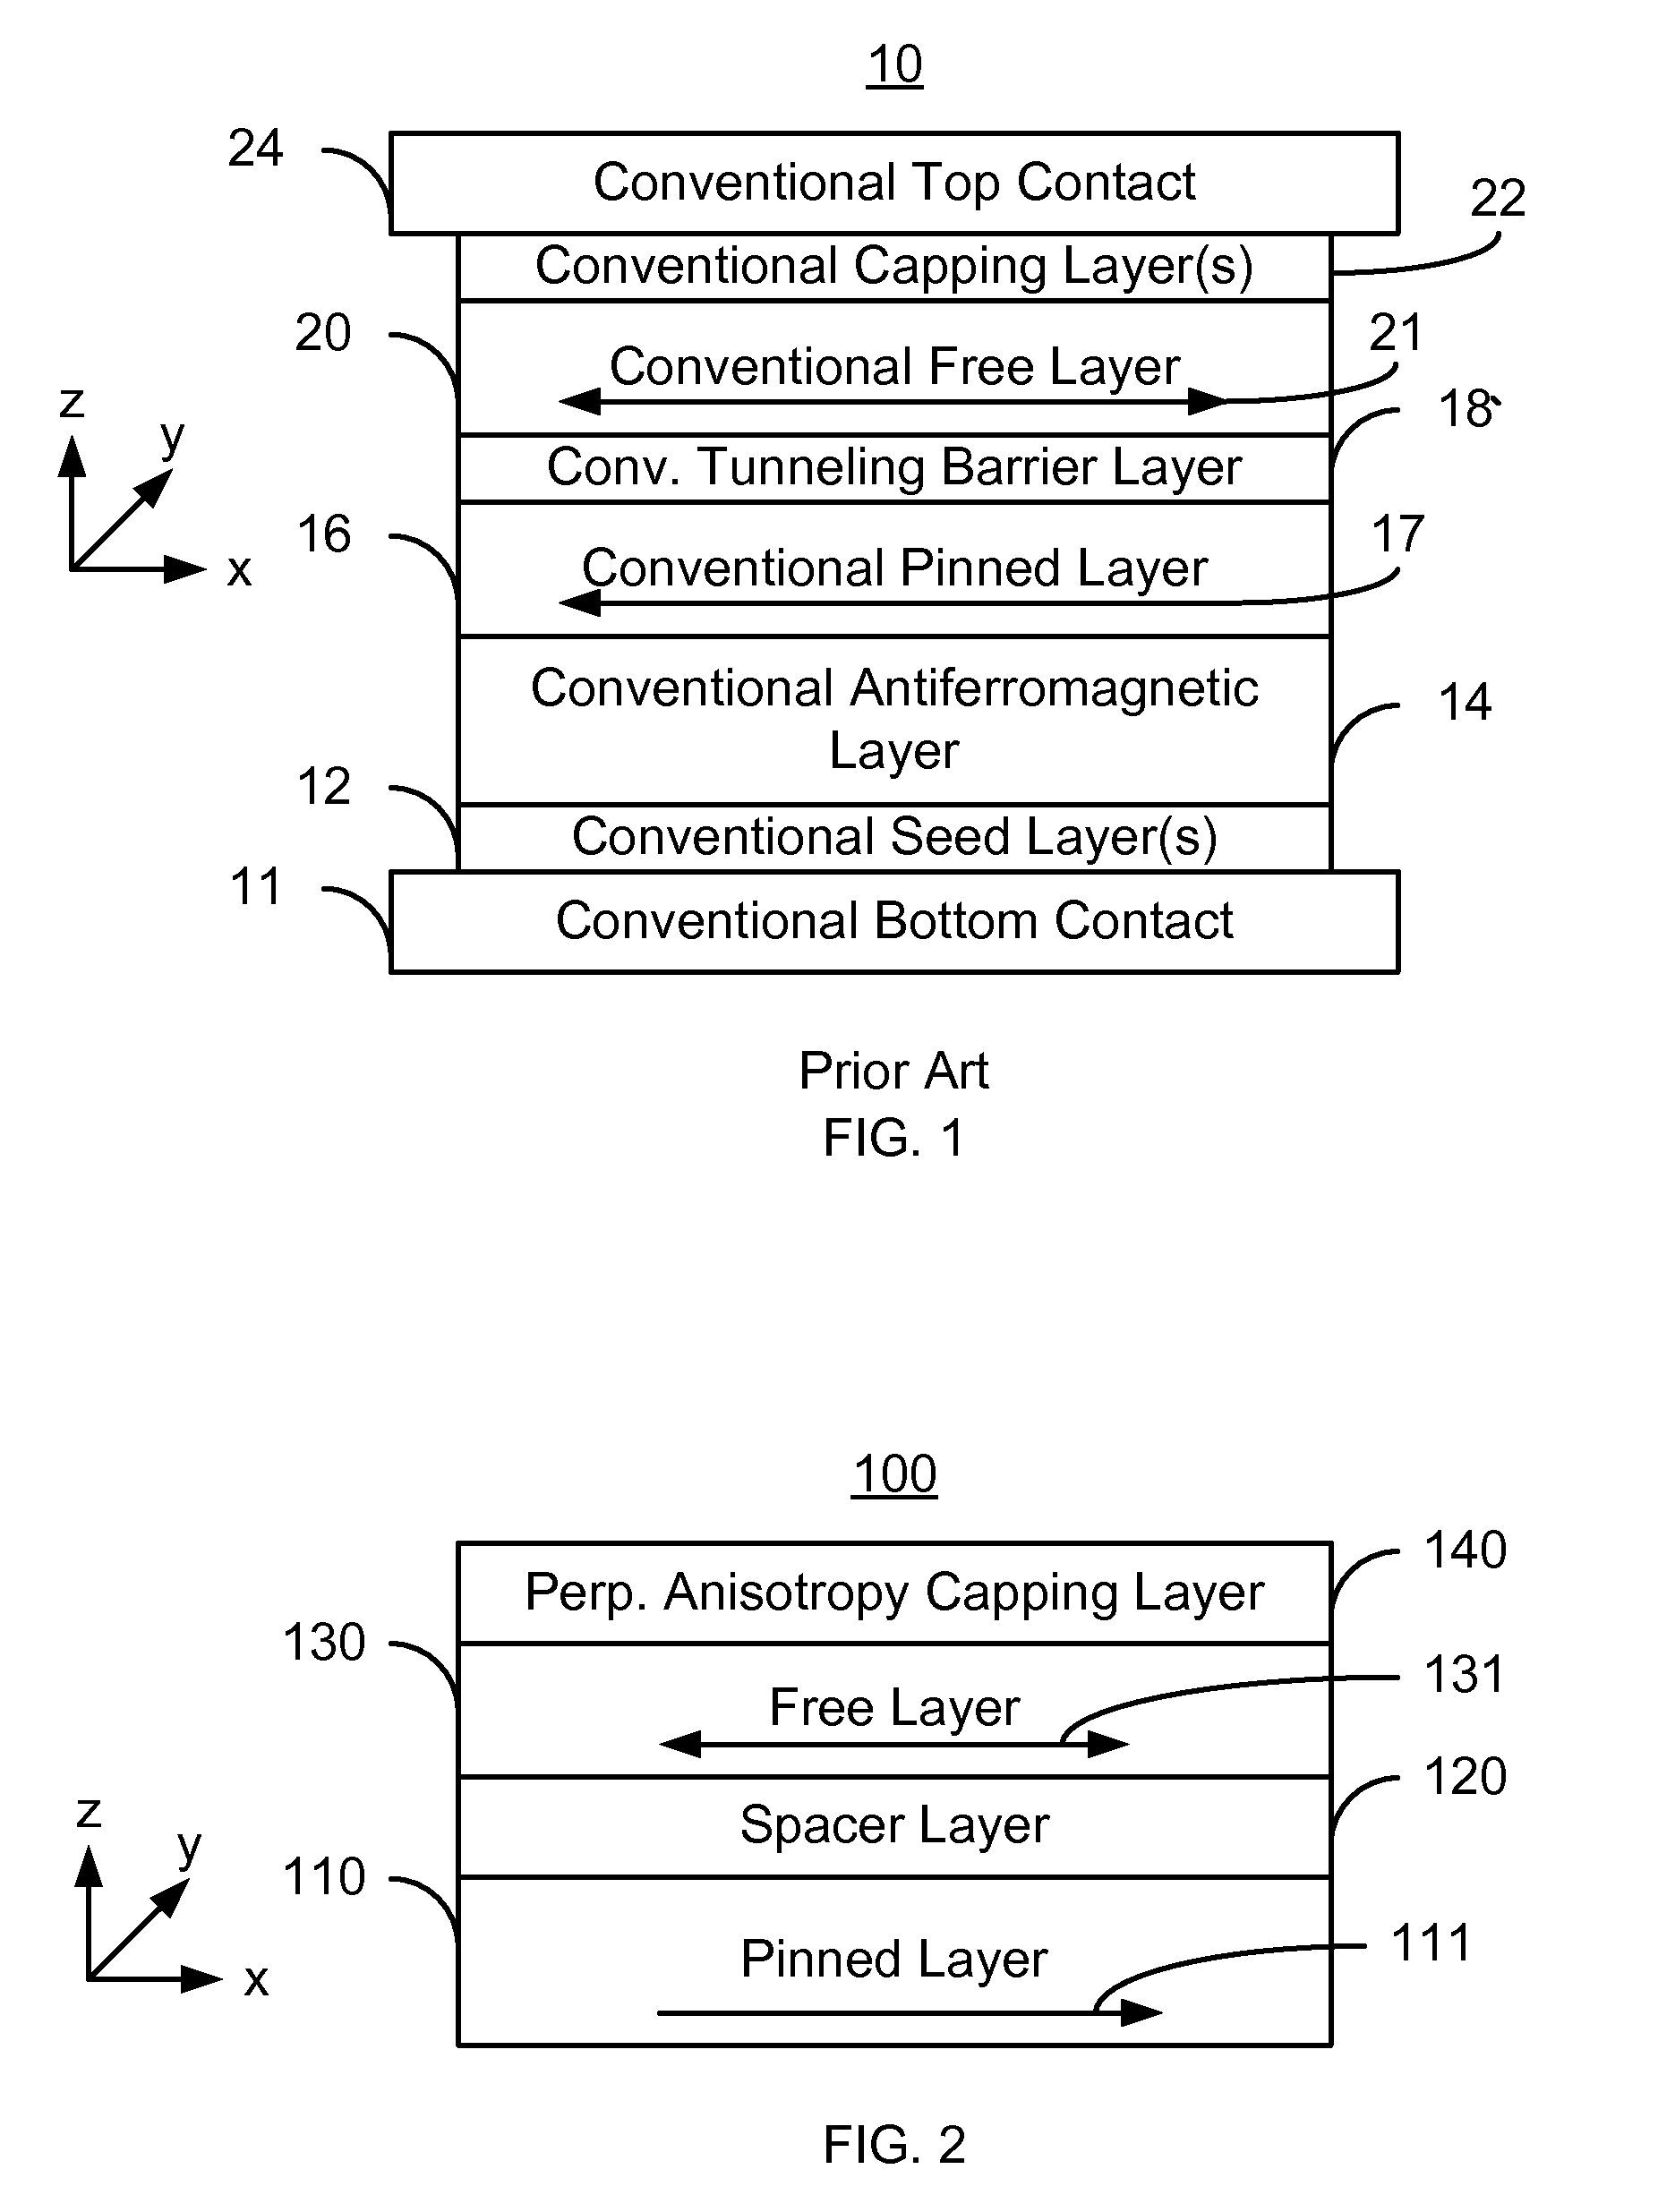 Method and system for providing magnetic tunneling junction elements having improved performance through capping layer induced perpendicular anisotropy and memories using such magnetic elements